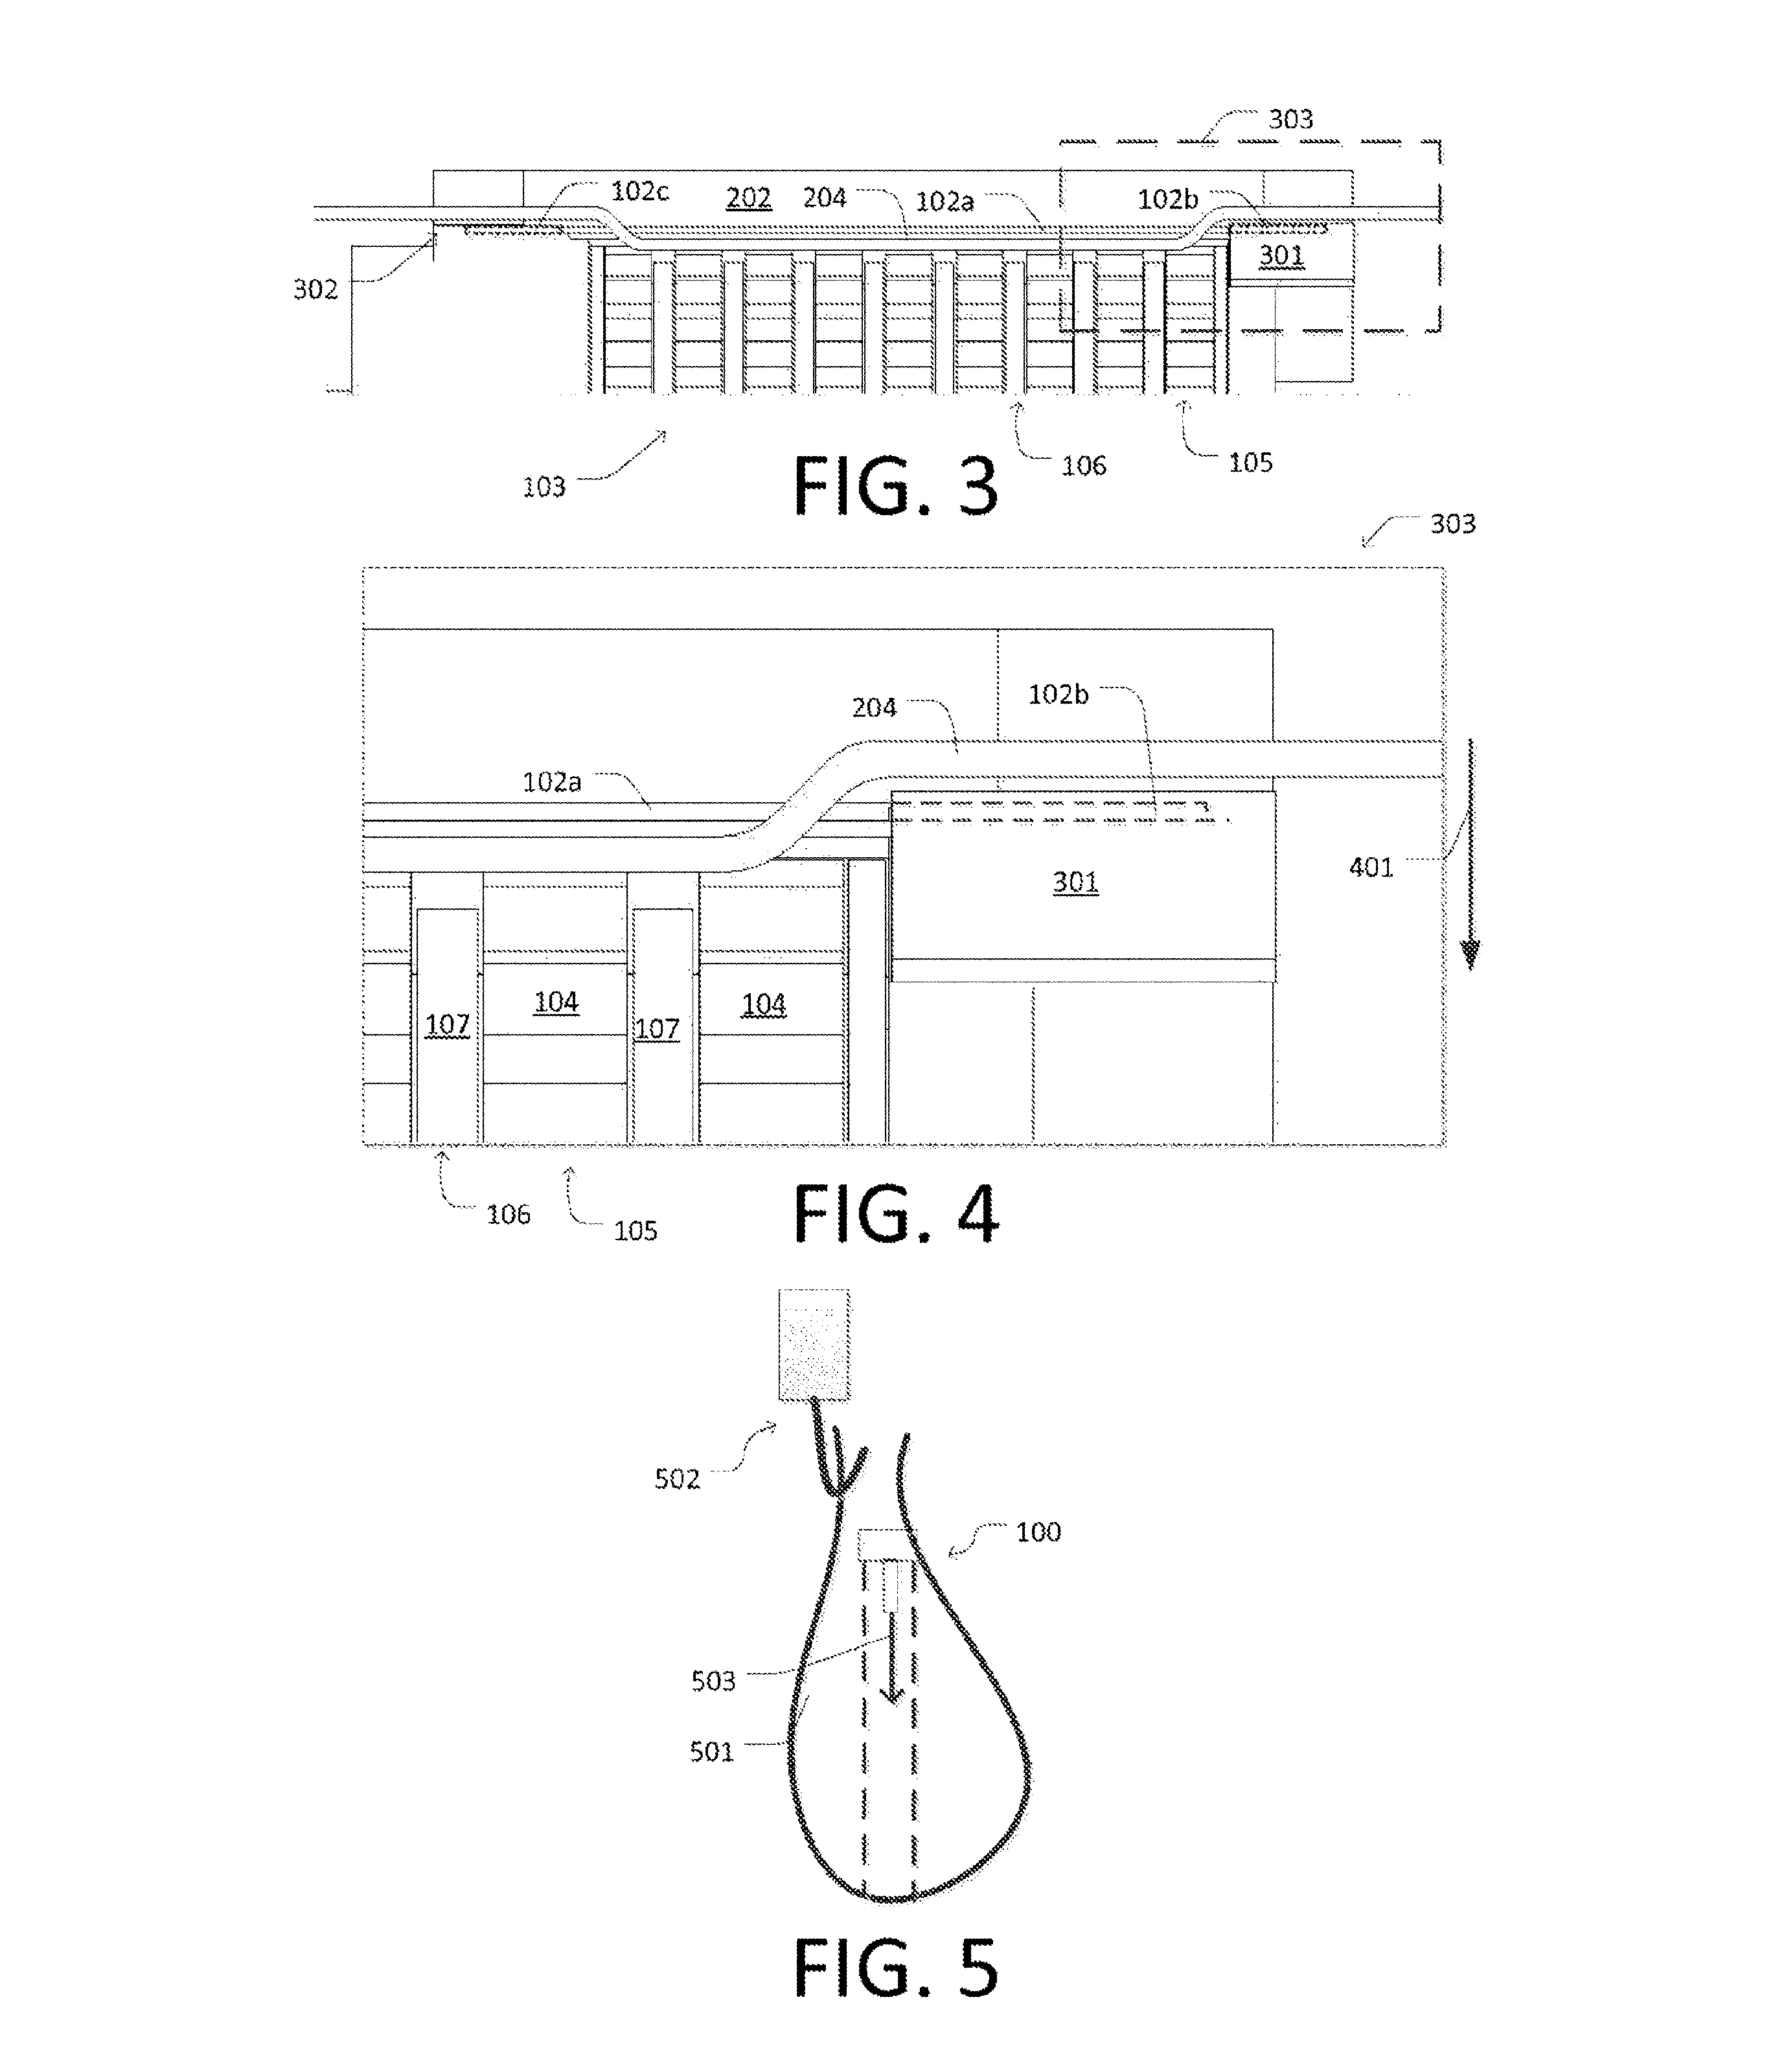 Skinning device for removing skin from an animal carcass